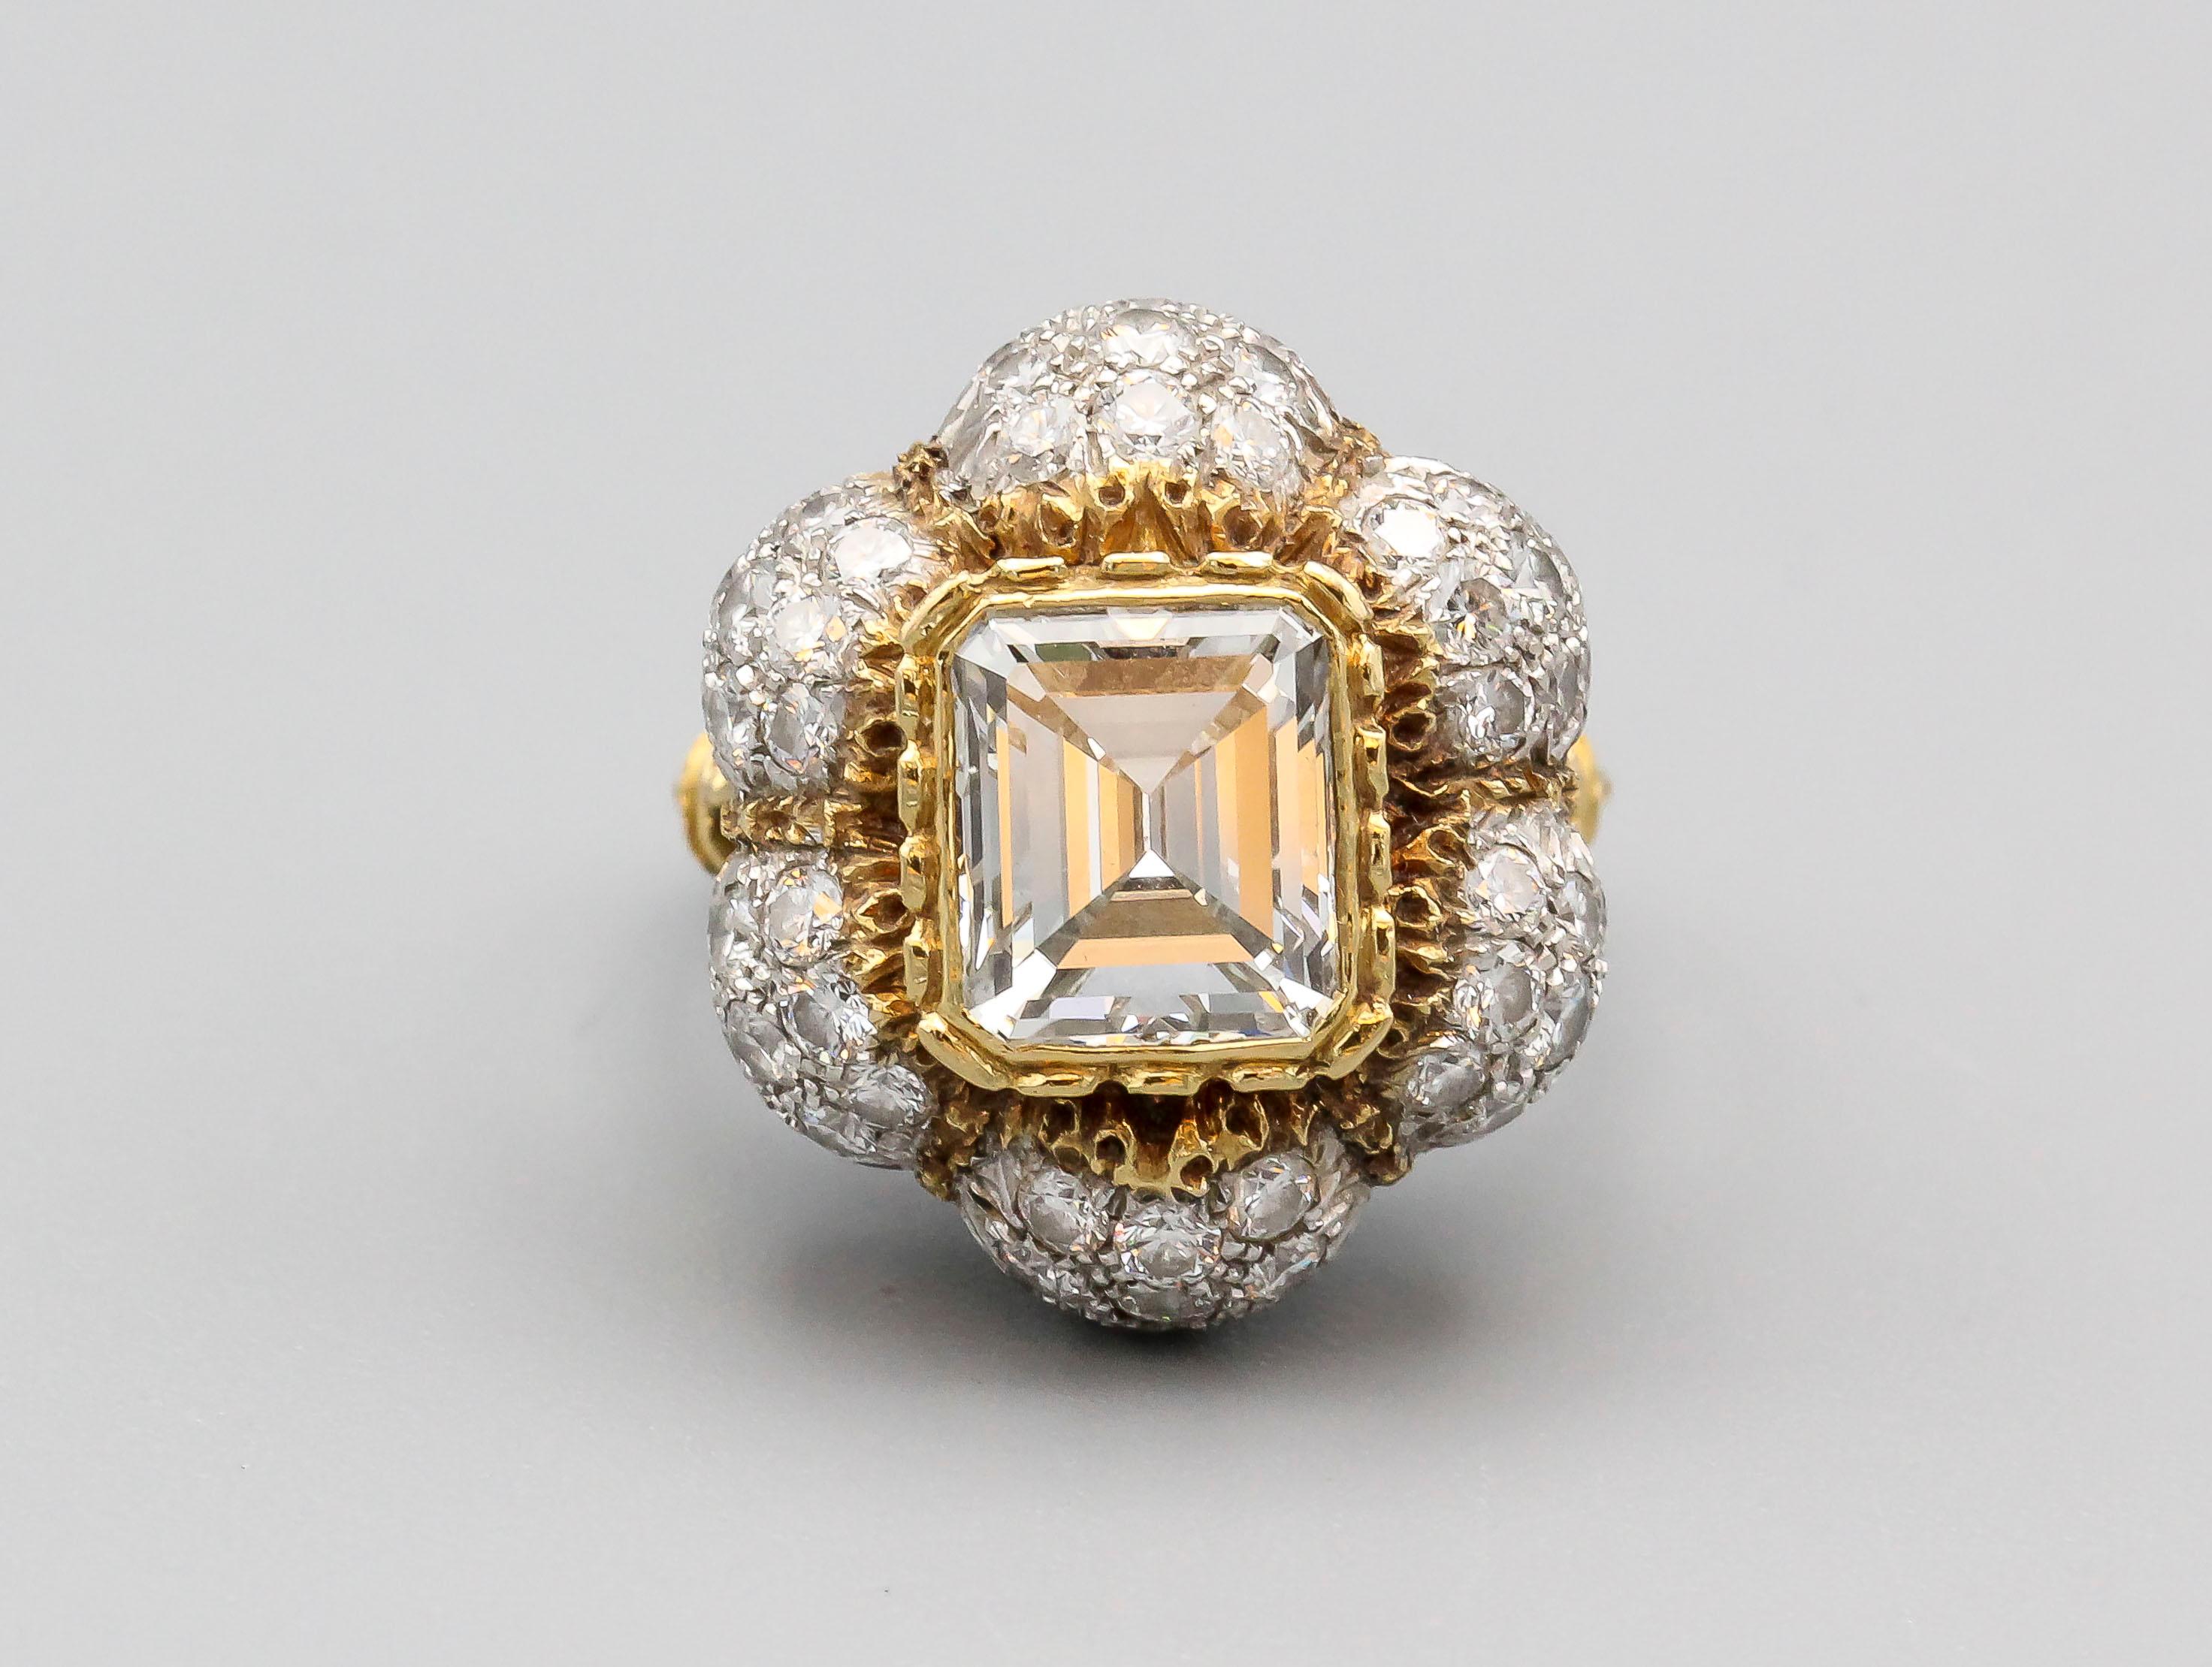 Very fine diamond and two-tone 18k gold ring by Federico Buccellati. It features a high grade emerald cut diamond center stone of approx. 3.0 cts in weight, approx. measurements 9mm length by 8mm width by 5mm depth; as well as high grade round